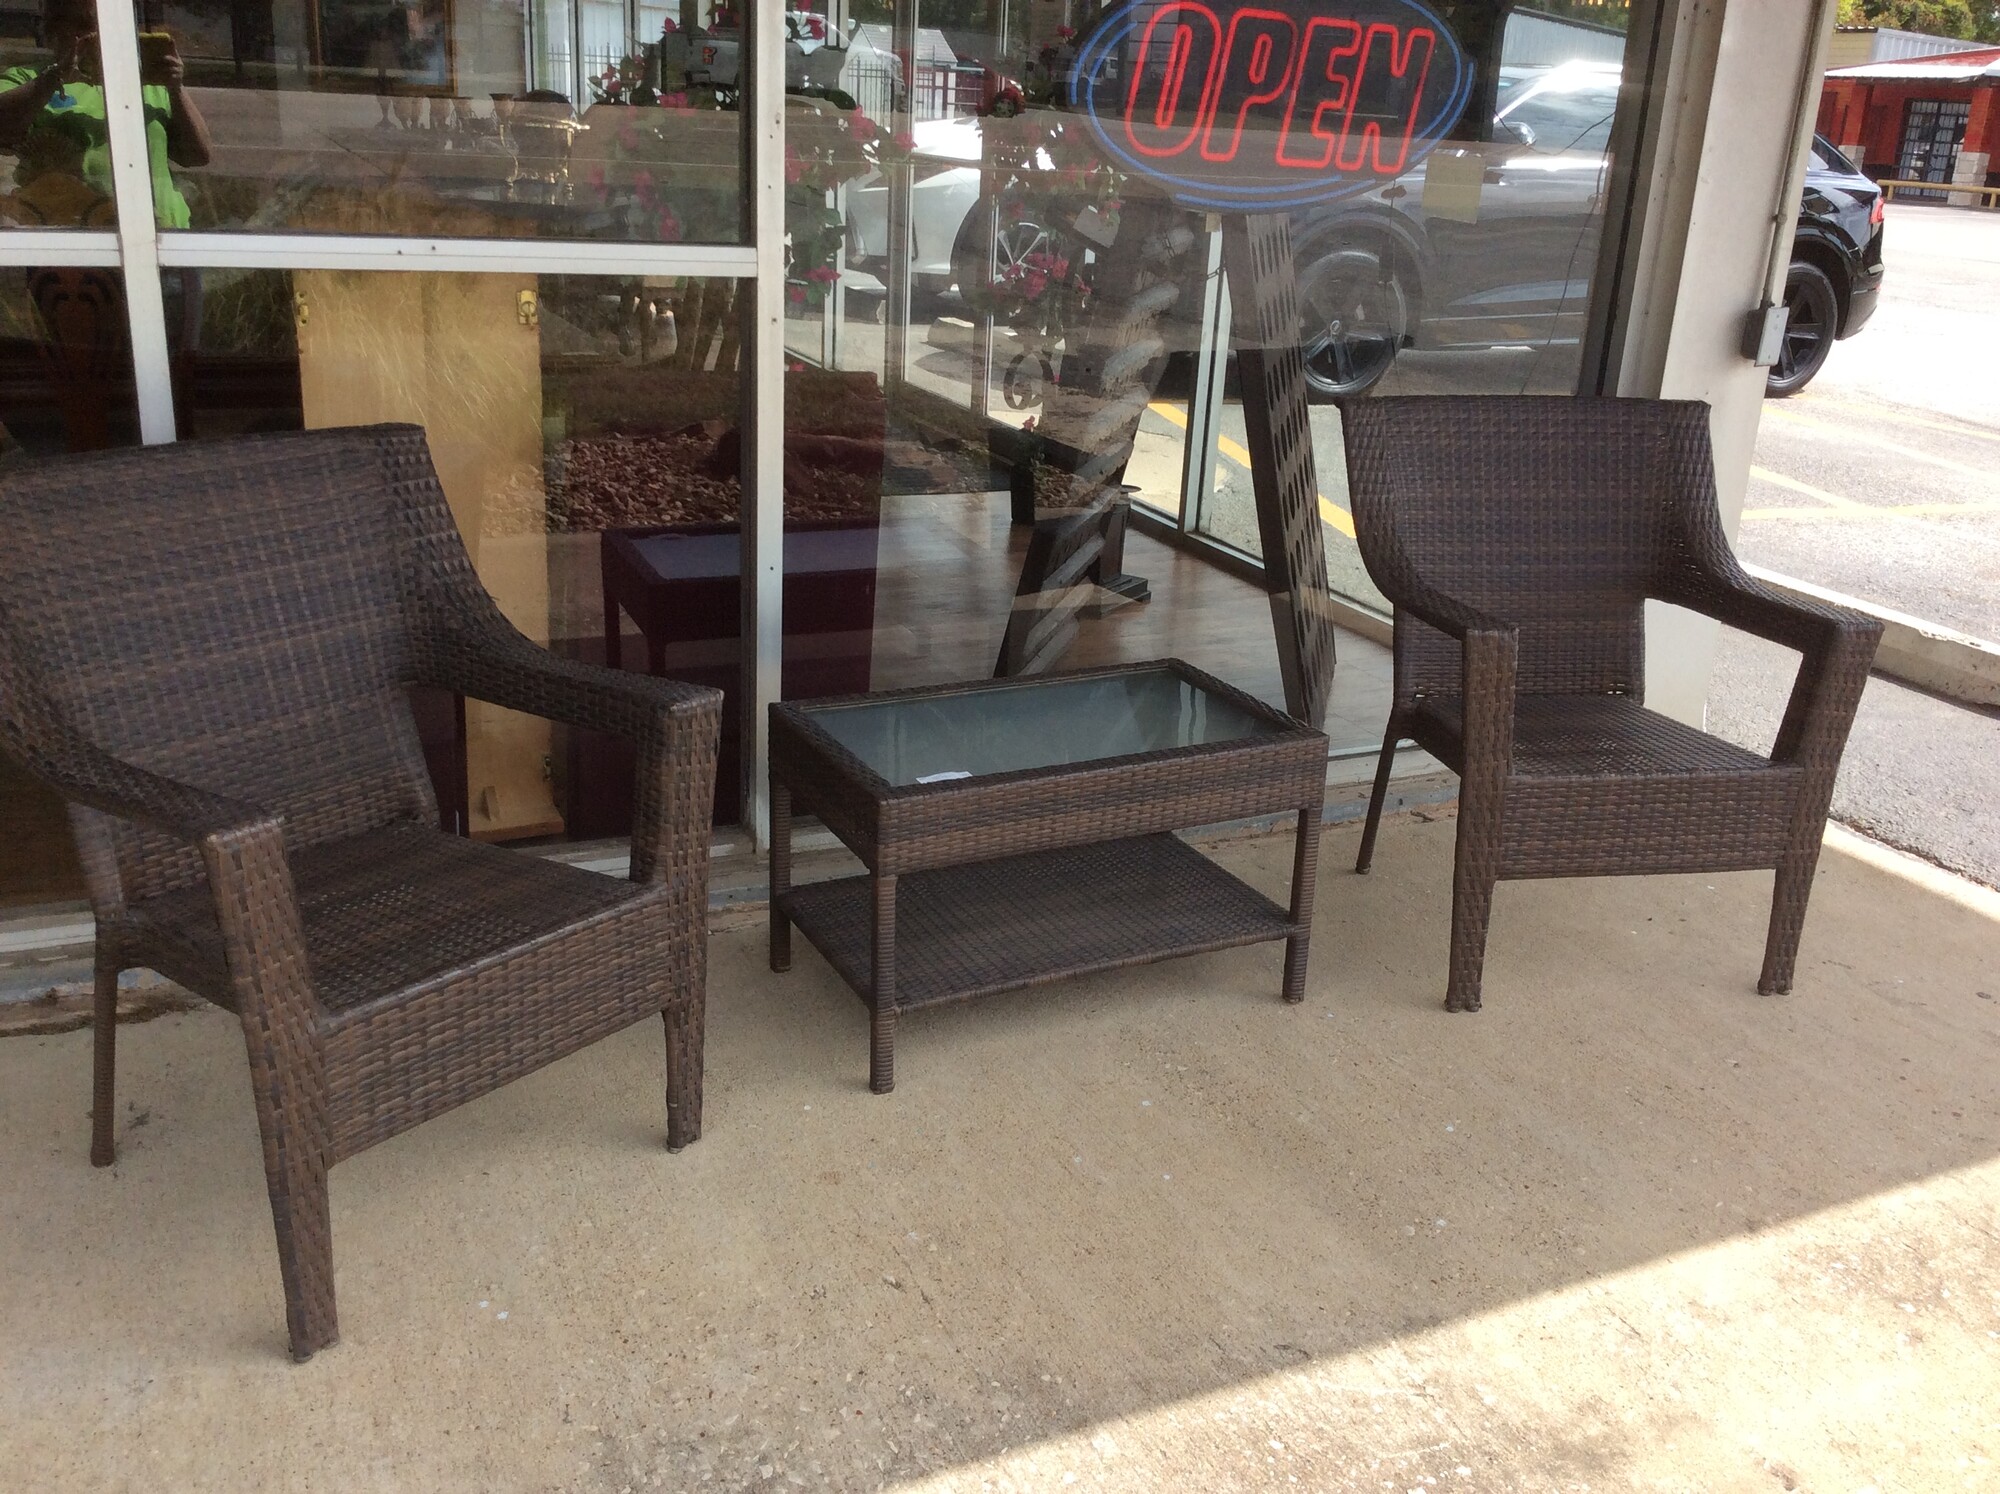 This is a 3 piece, wicker type, brown patio set. This set has 2 arm chairs and a coffee table with a glass top.